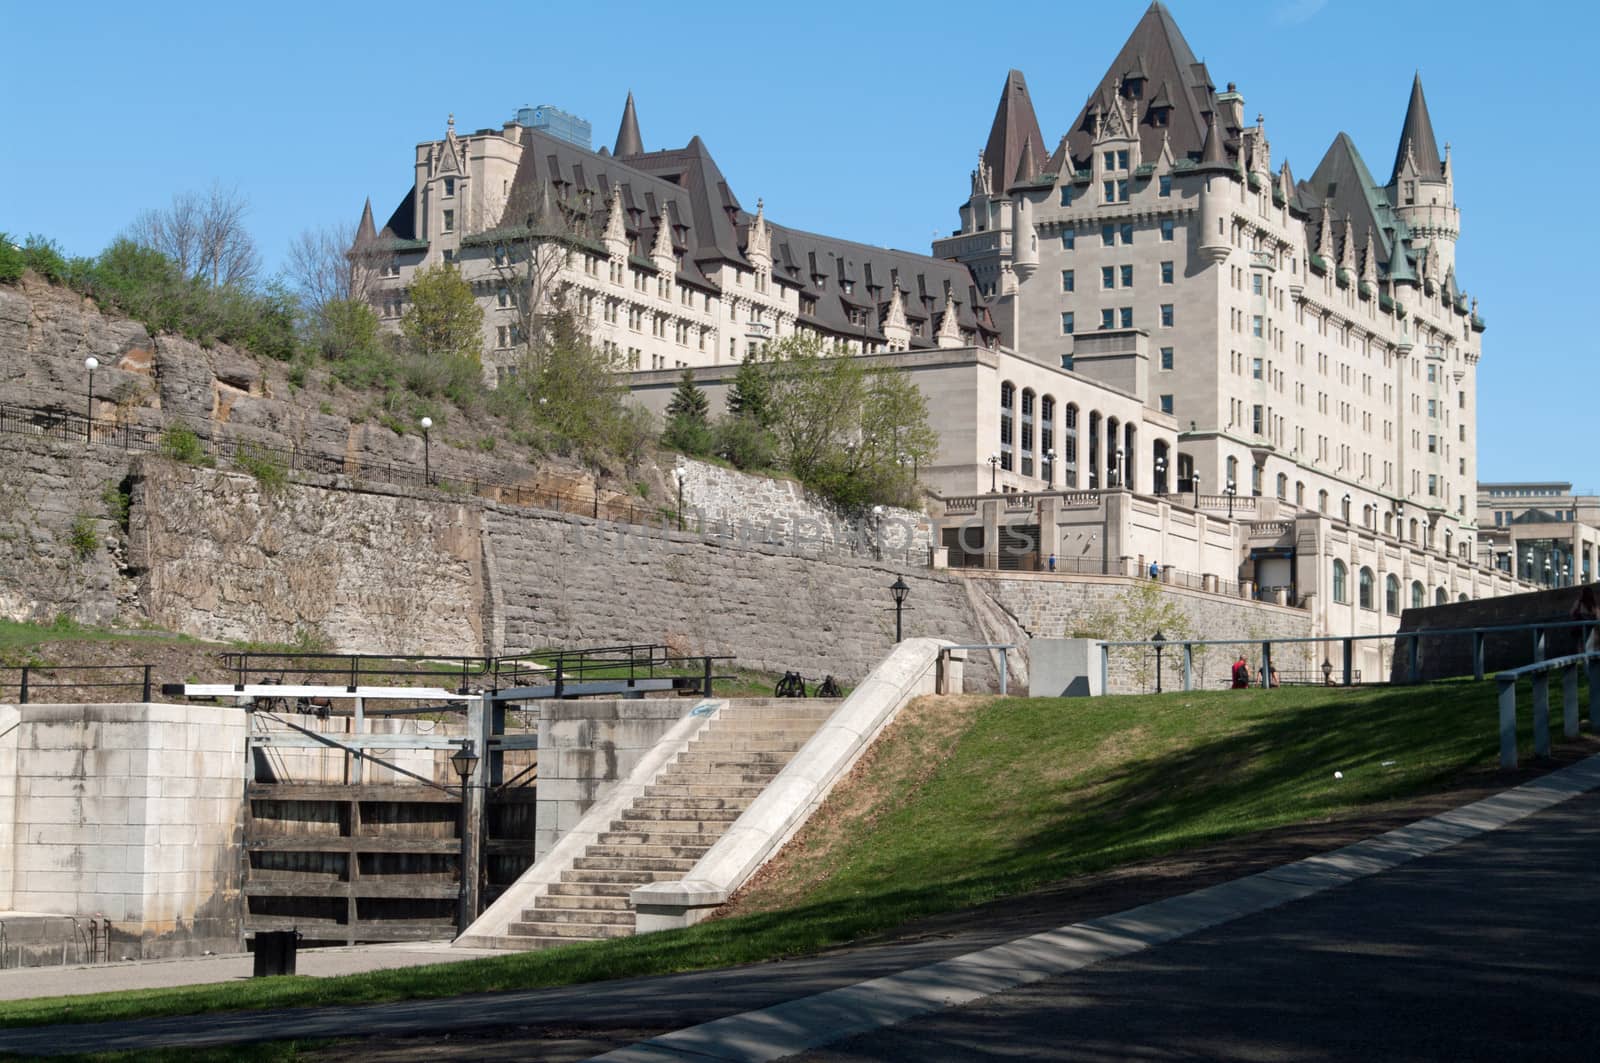 Fairmont Chateau Laurier by the Rideau Canal